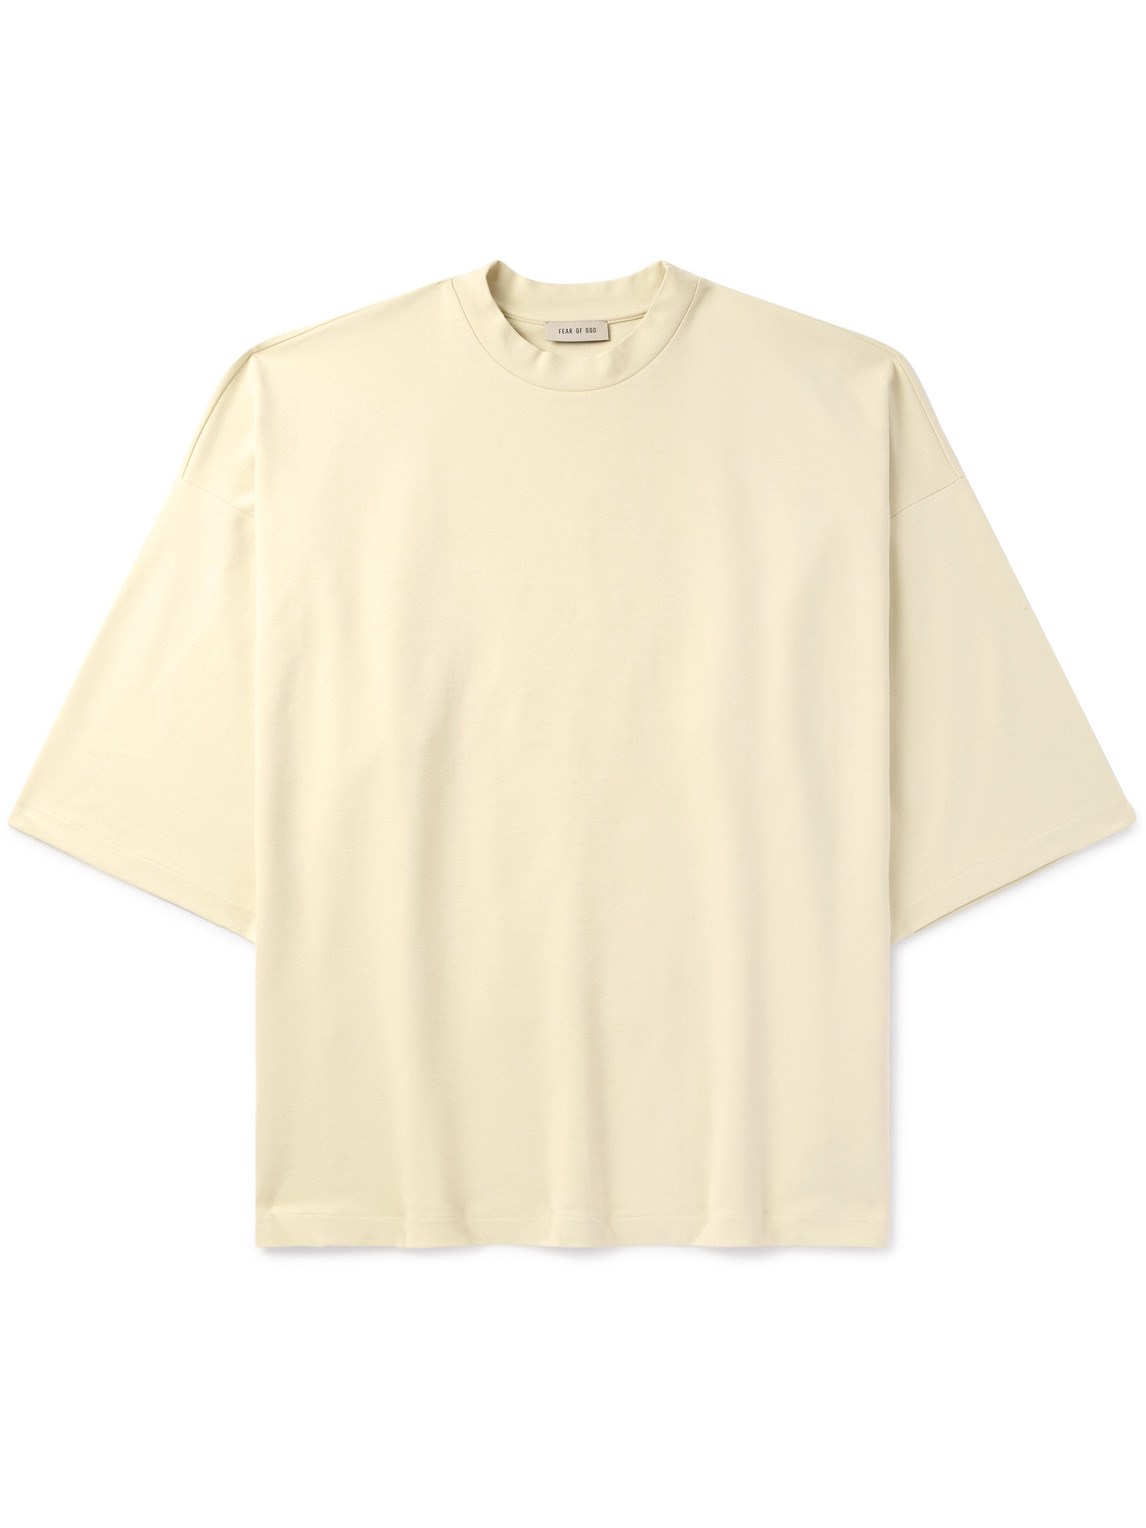 Fear of God - Thunderbird Milano Oversized Embroidered Jersey T-Shirt - Men - Yellow - XS von Fear of God